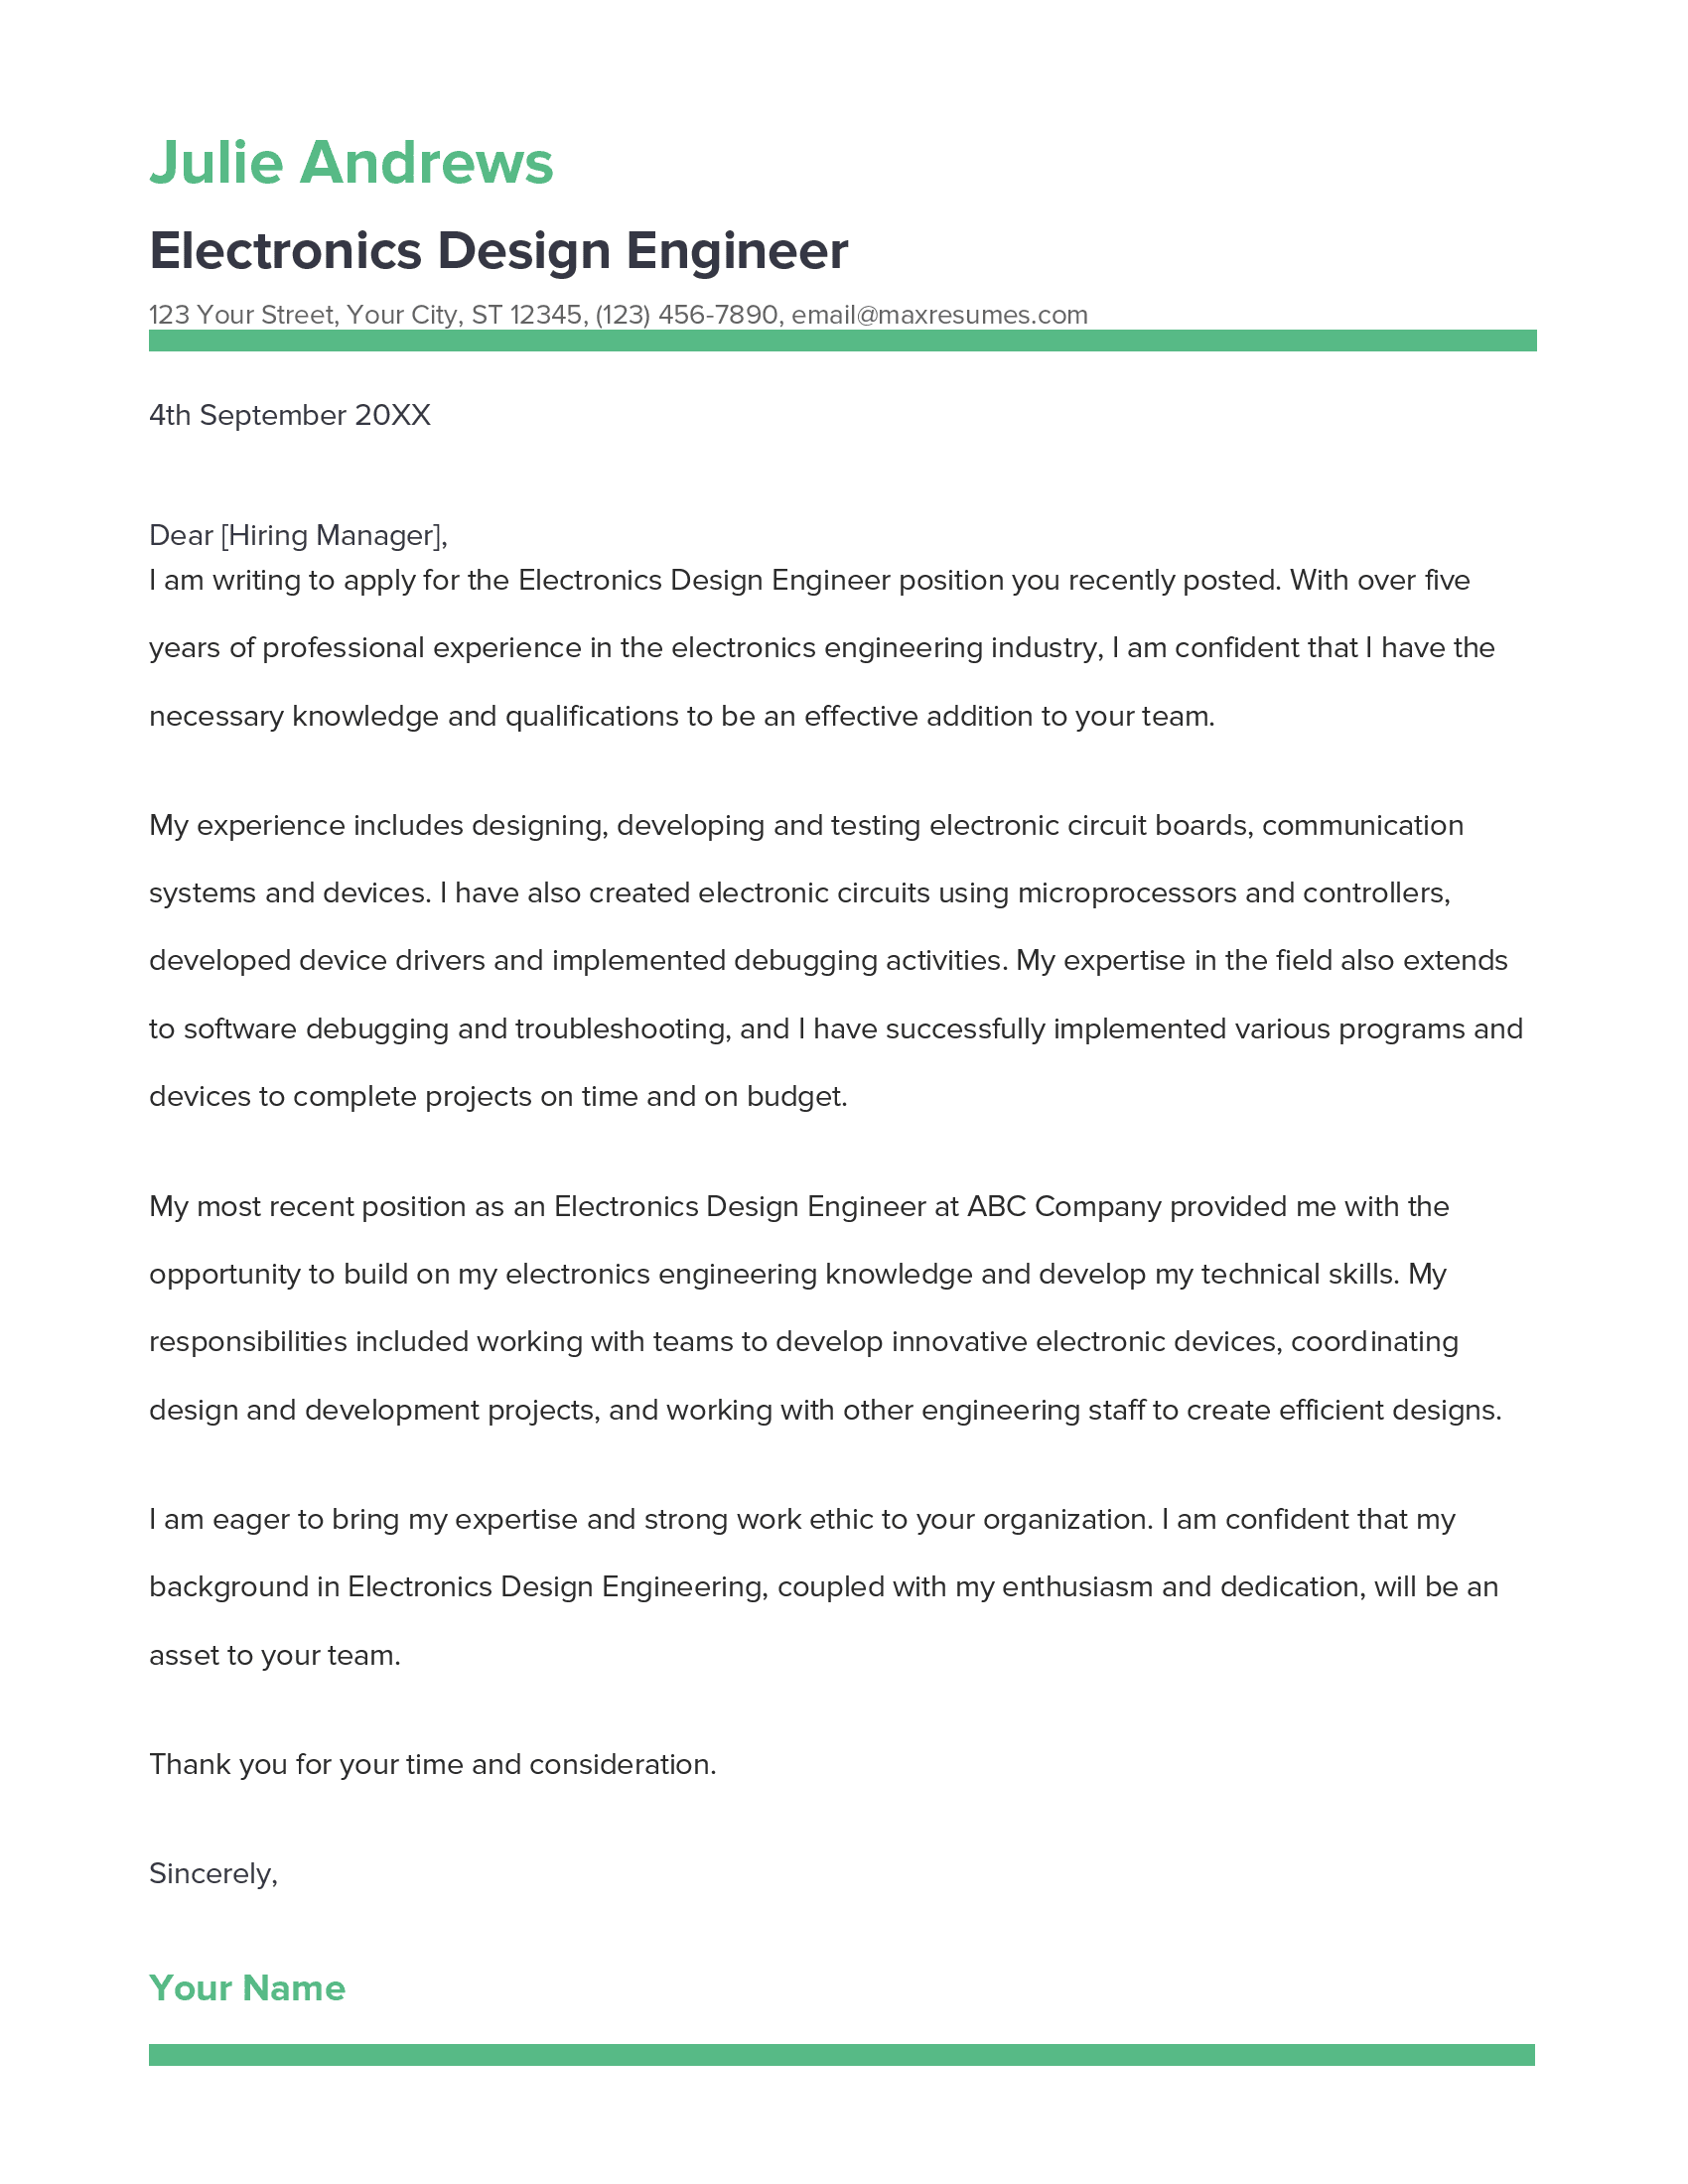 Electronics Design Engineer Cover Letter Example